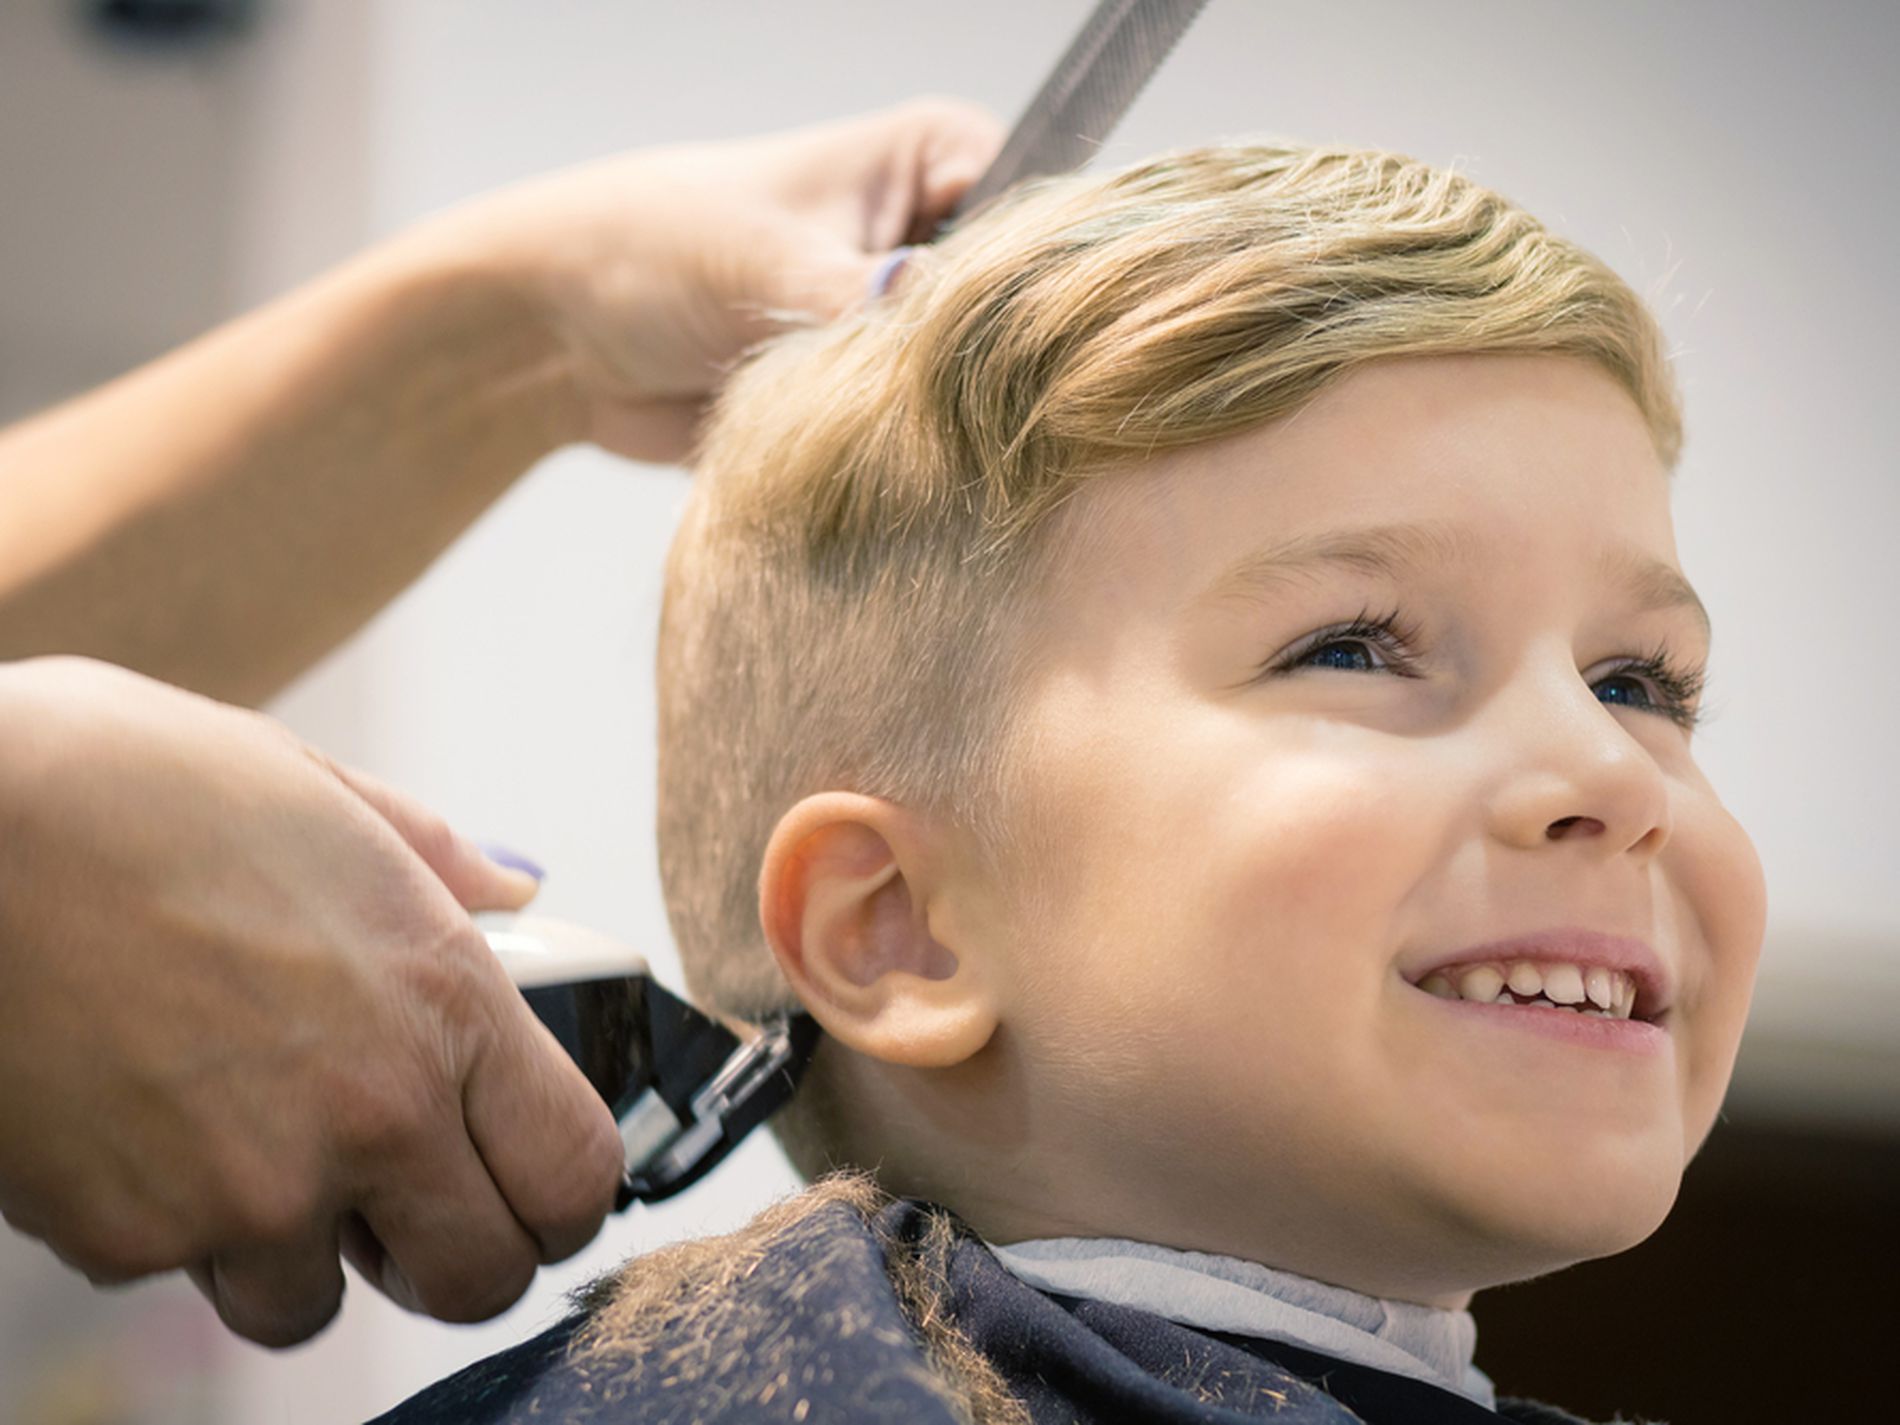 Hair Cutting Salon Business for Sale Doncaster
